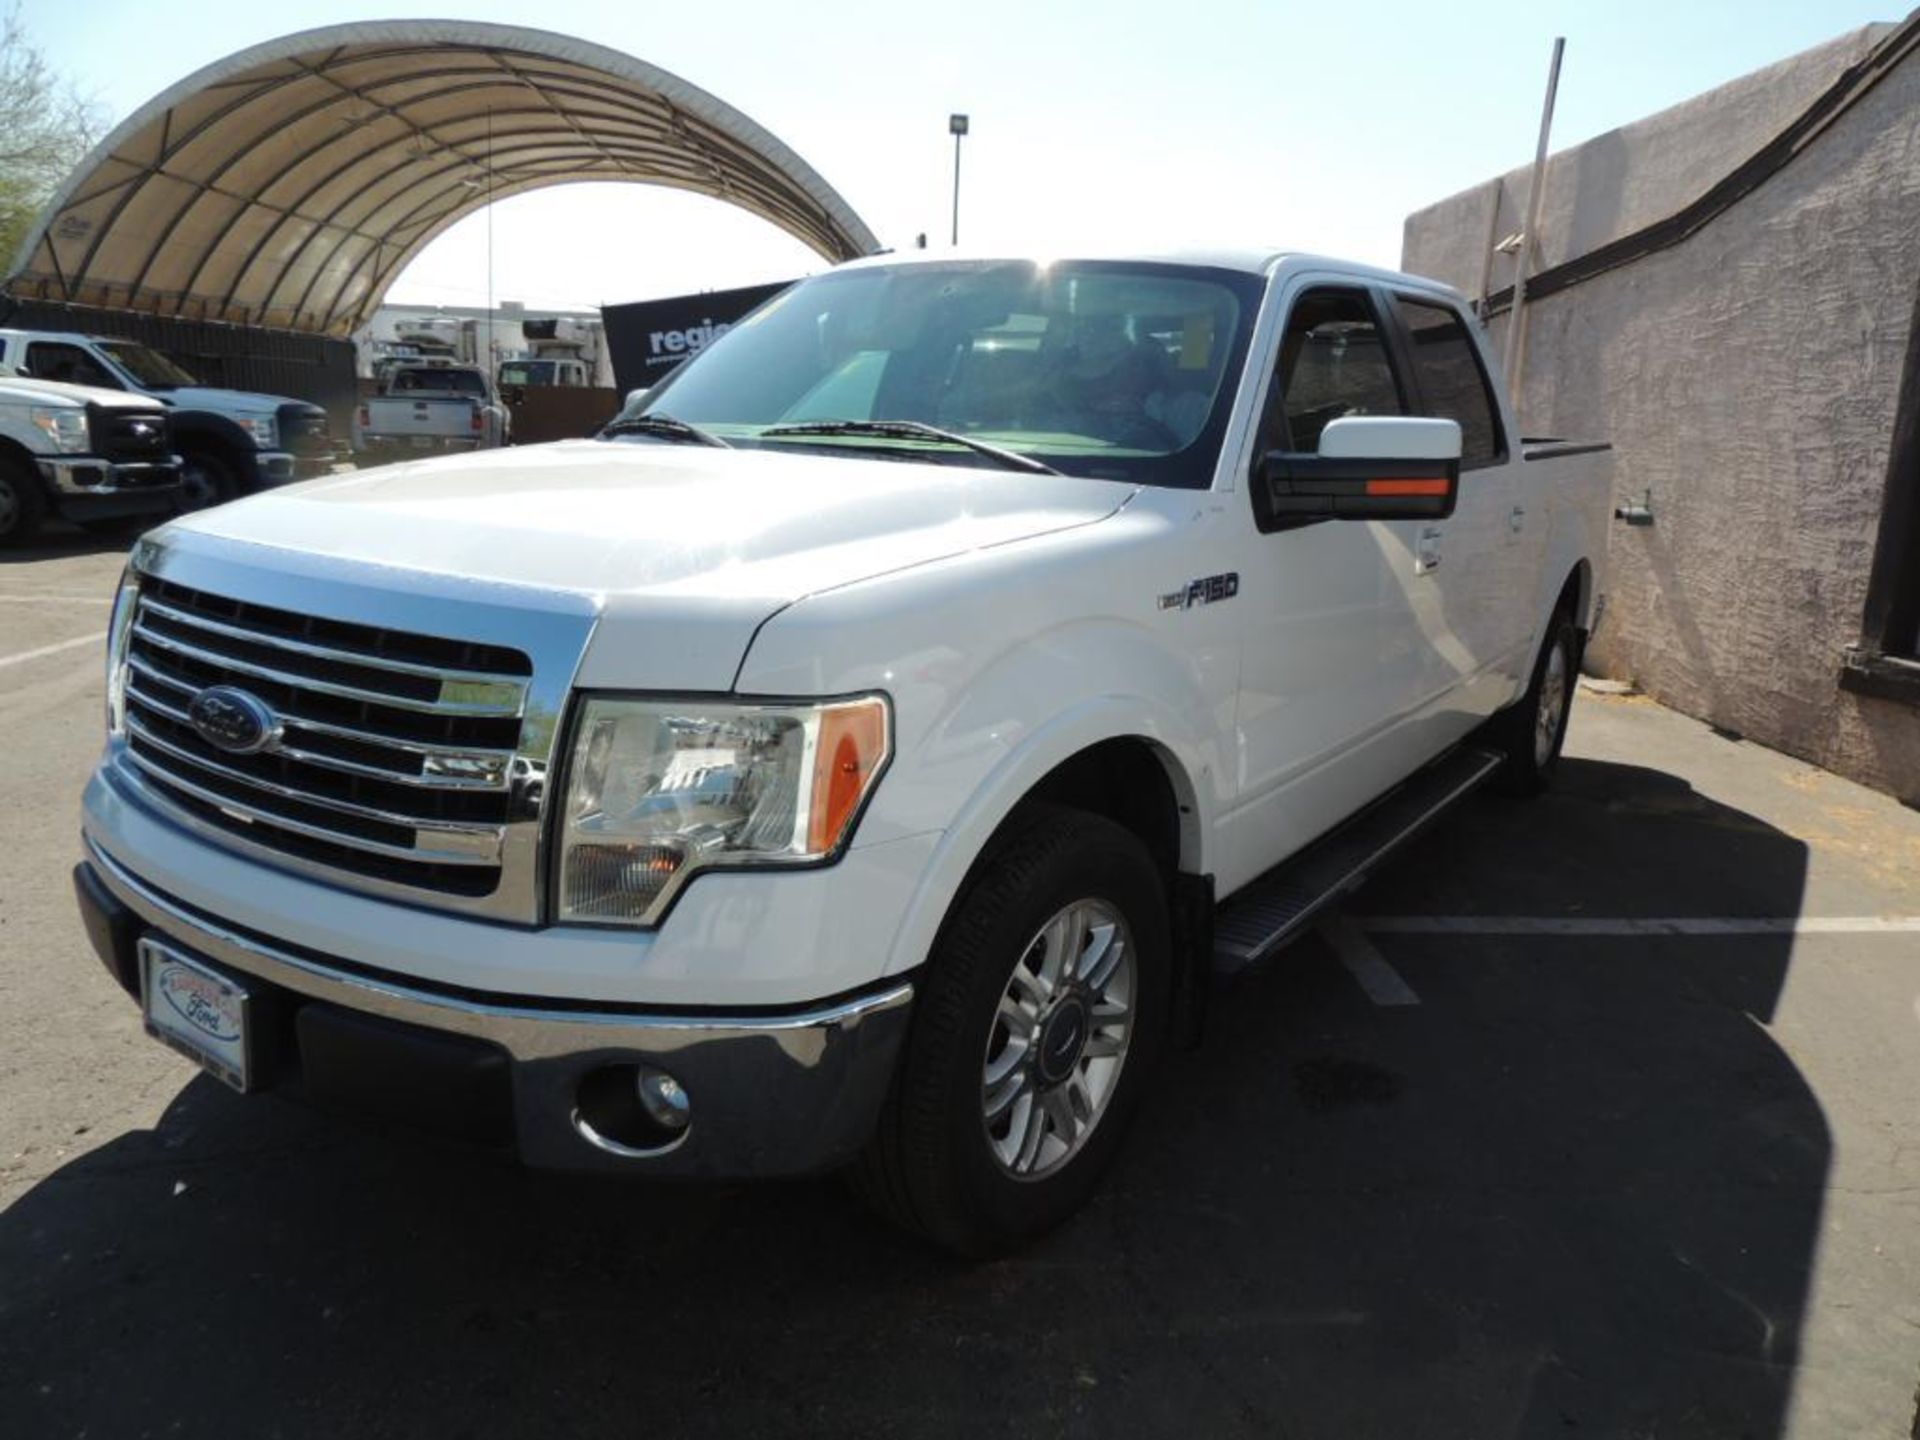 2014 Ford F150 Lariat Crew Cab Shortbed 4x2, VIN # 1FTFW1CF6EKE70611, 5.0 Ltr. Auto Trans, 106992